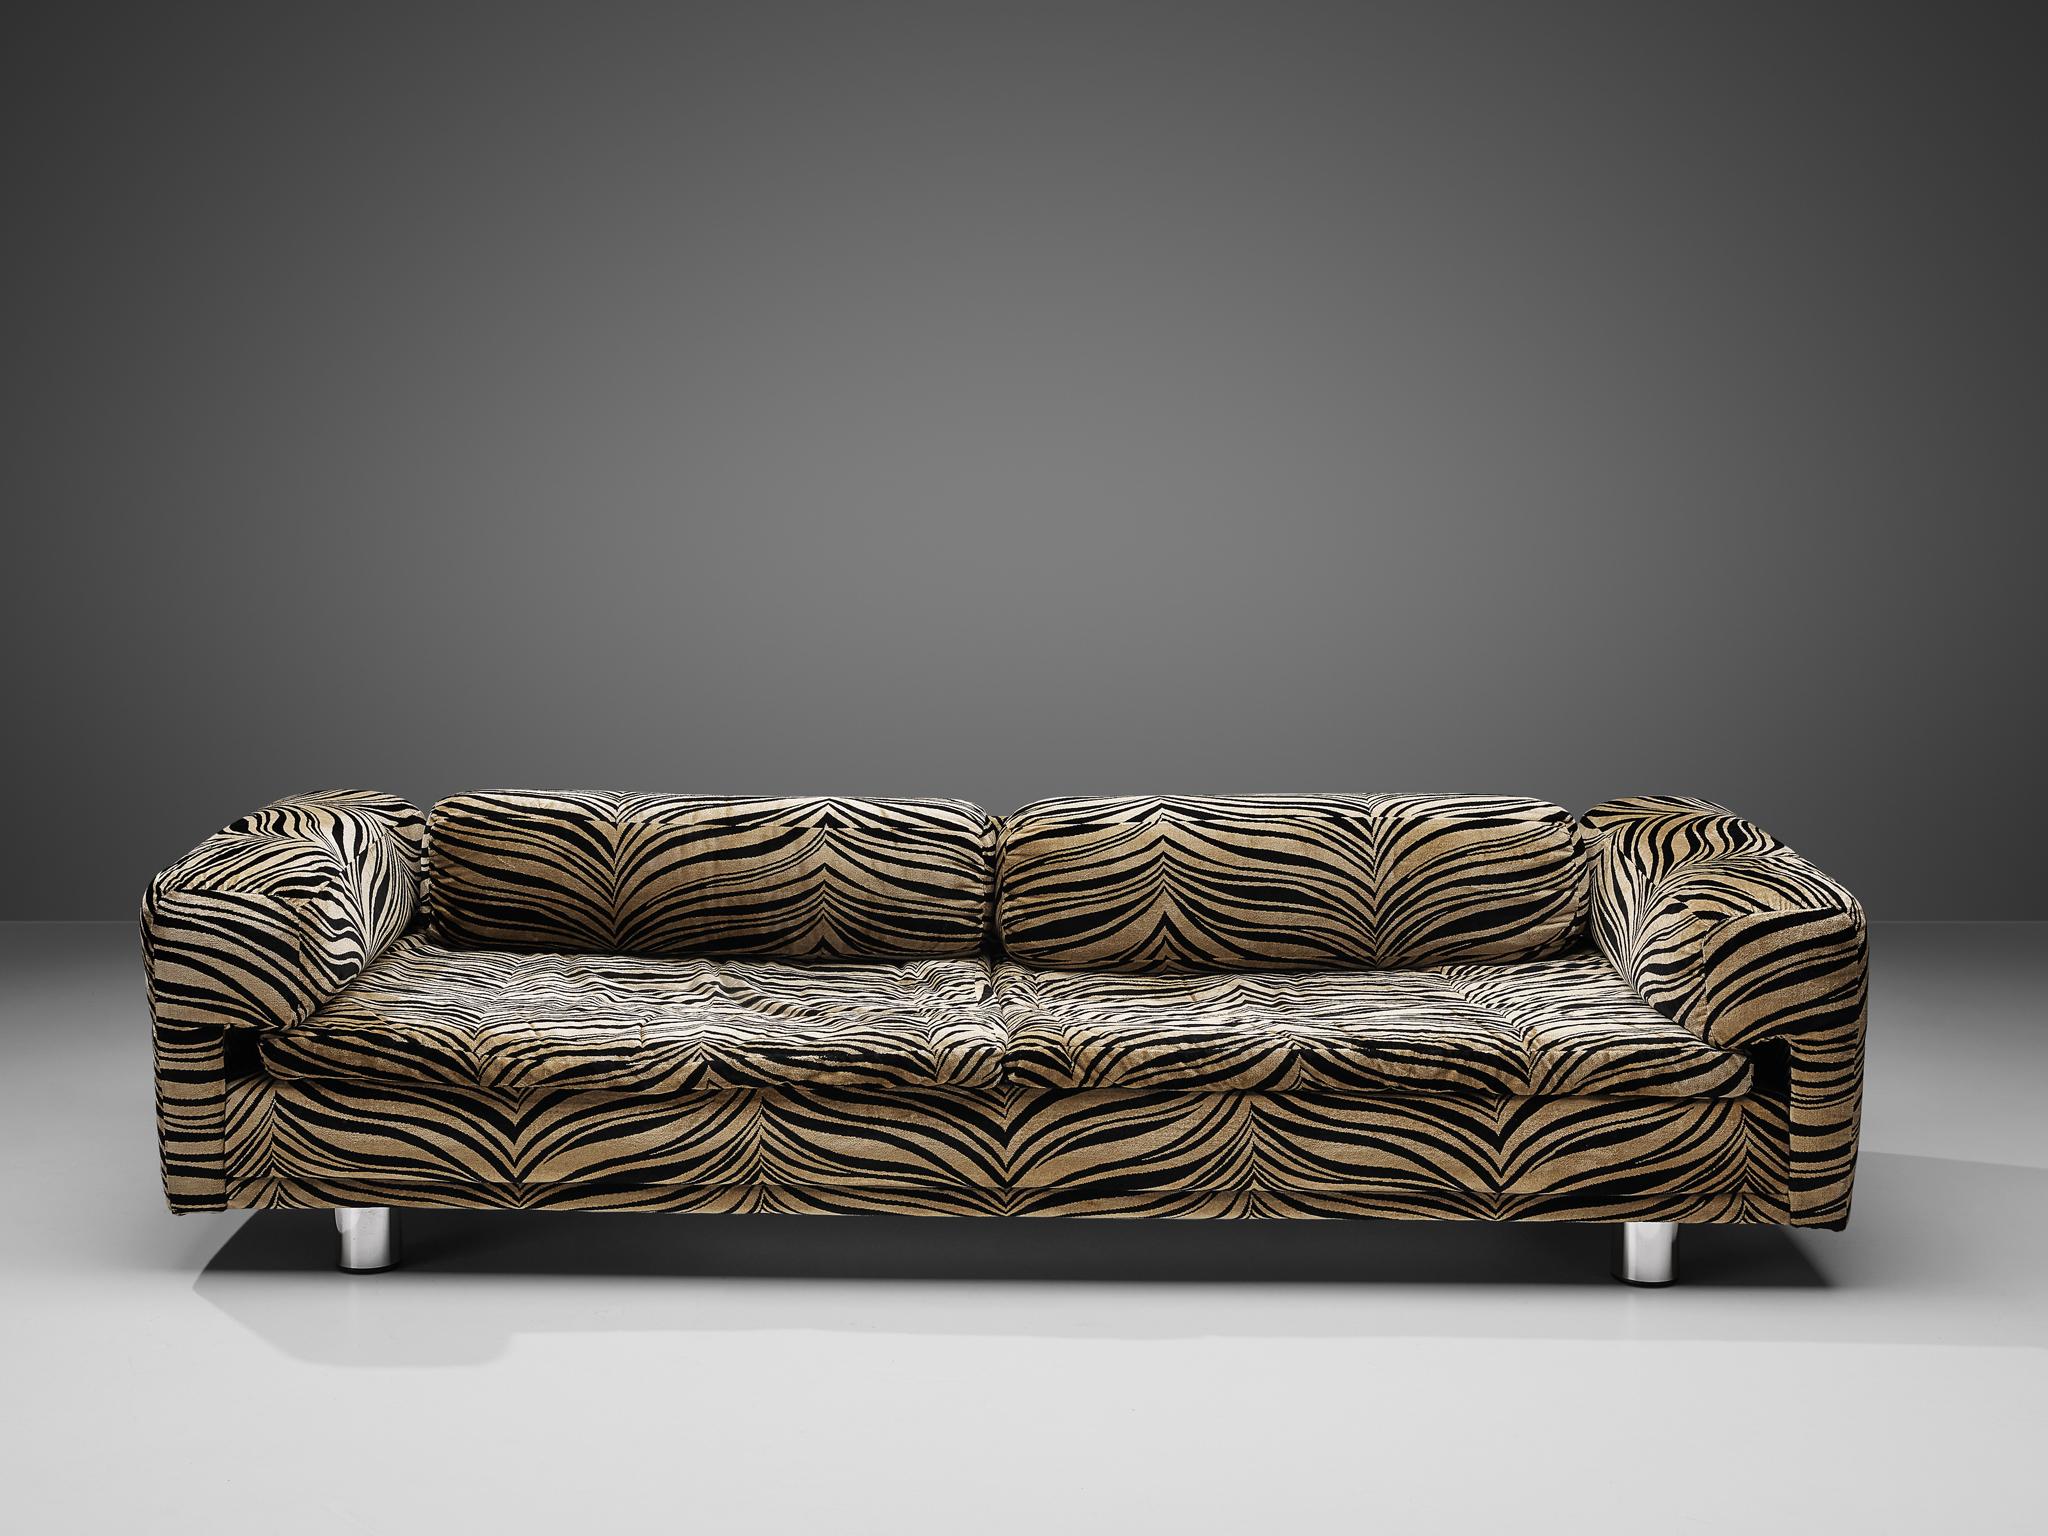 Howard Keith for HK Furniture, 'Diplomat' sofa, fabric, chrome-plated metal, United Kingdom, 1970s

This grand voluptuous ‘Diplomat’ sofa finds itself at the intersection of art and design. The exceptional and unique upholstery is executed in